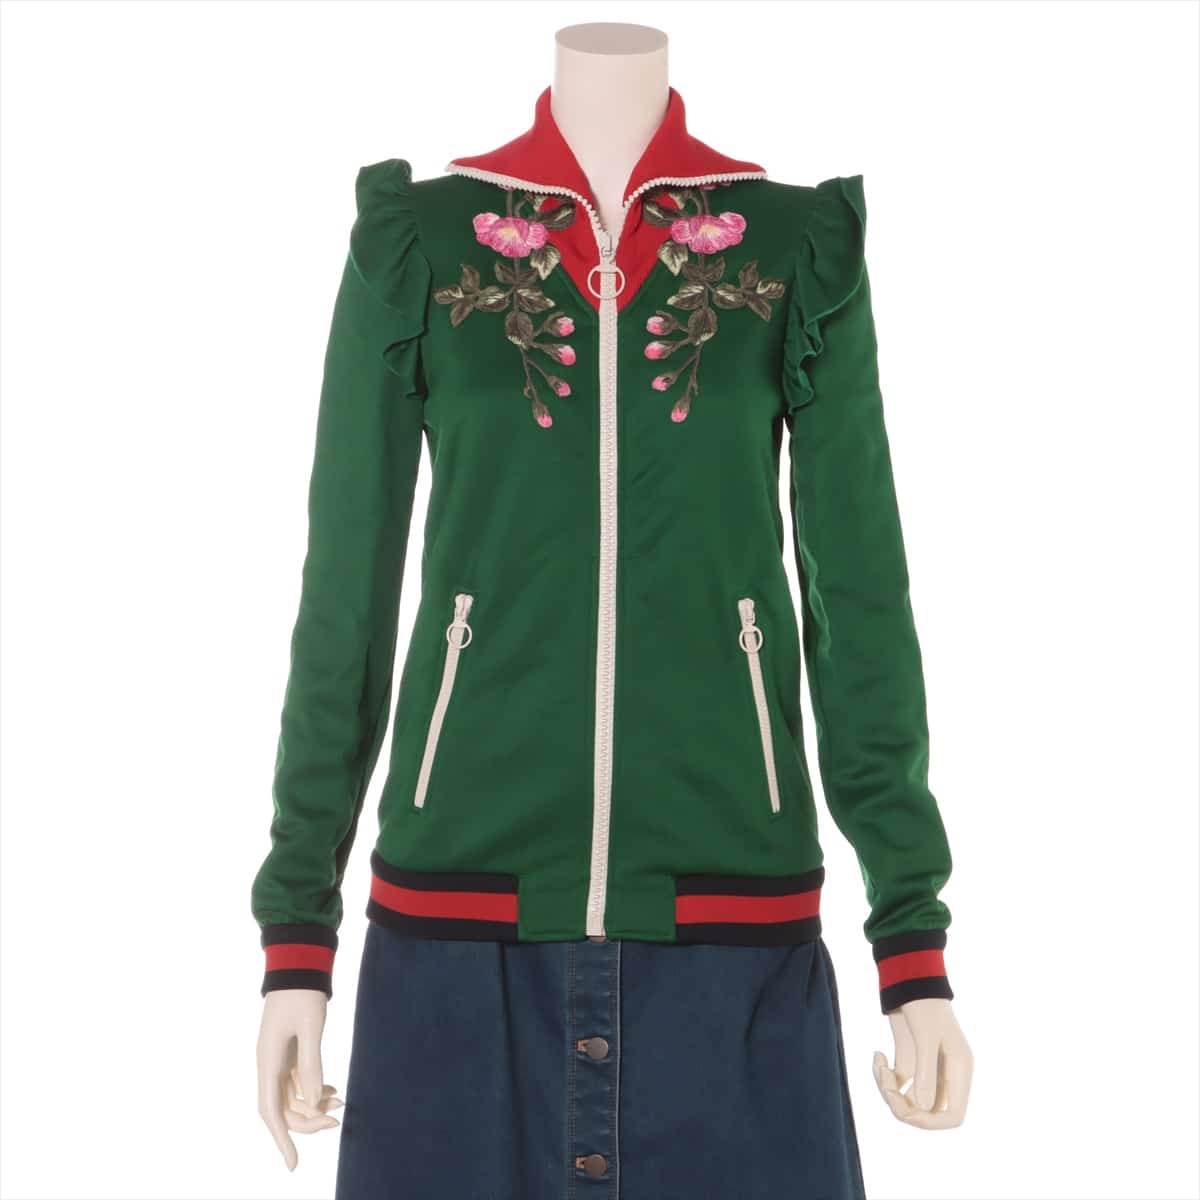 Gucci Cotton & polyester Sweatsuit XS Ladies' Green  479536 flower embroidery